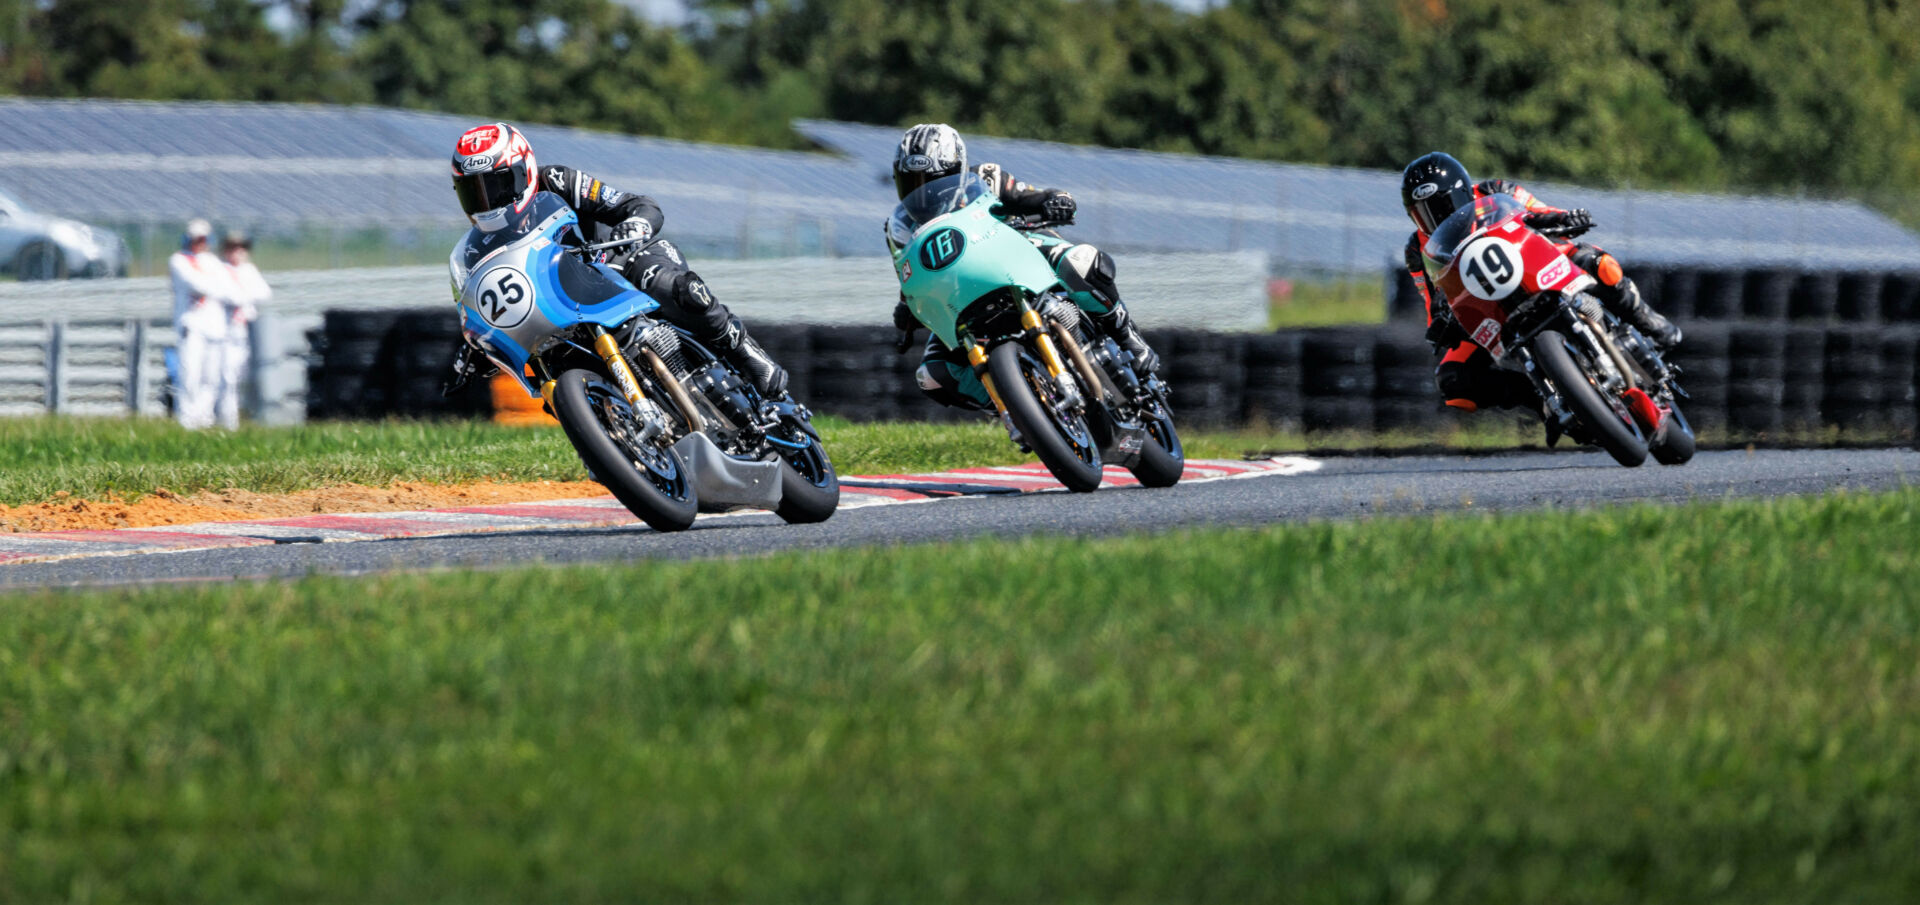 Crystal Martinez (25) leads Kayleigh Buyck (16), and Jennifer Chancellor (19) during the Royal Enfield BTR race at NJMP. Photo courtesy Royal Enfield North America.